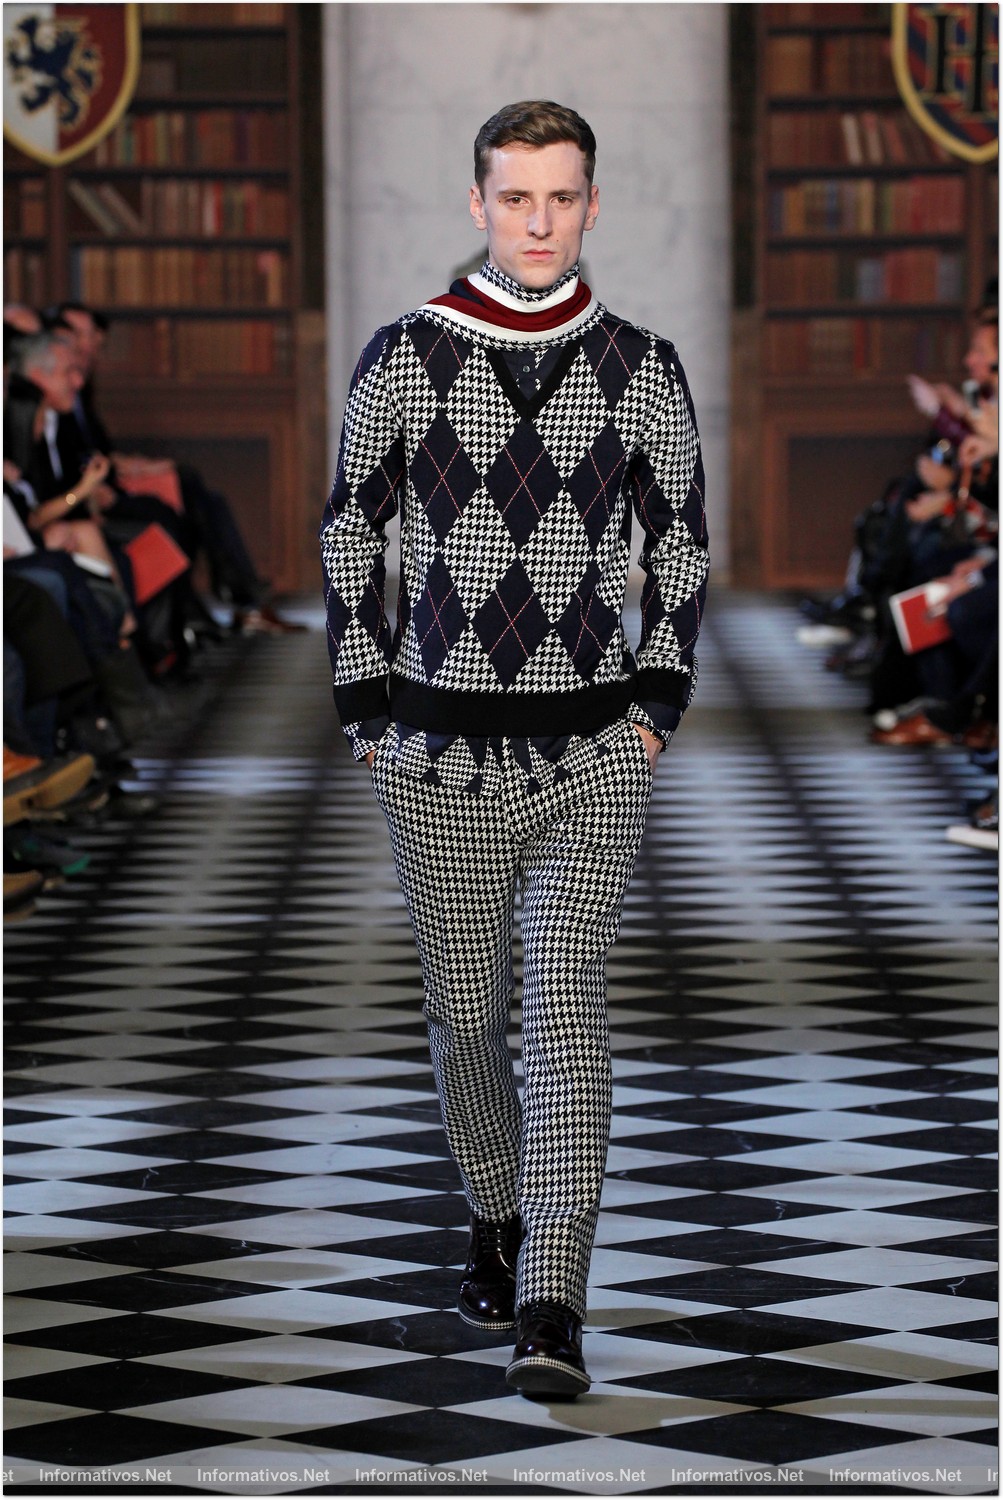 NY08FEB013.- Desfile Tommy Hilfiger Fall 2013 Men's Collection. 16. GEORGE